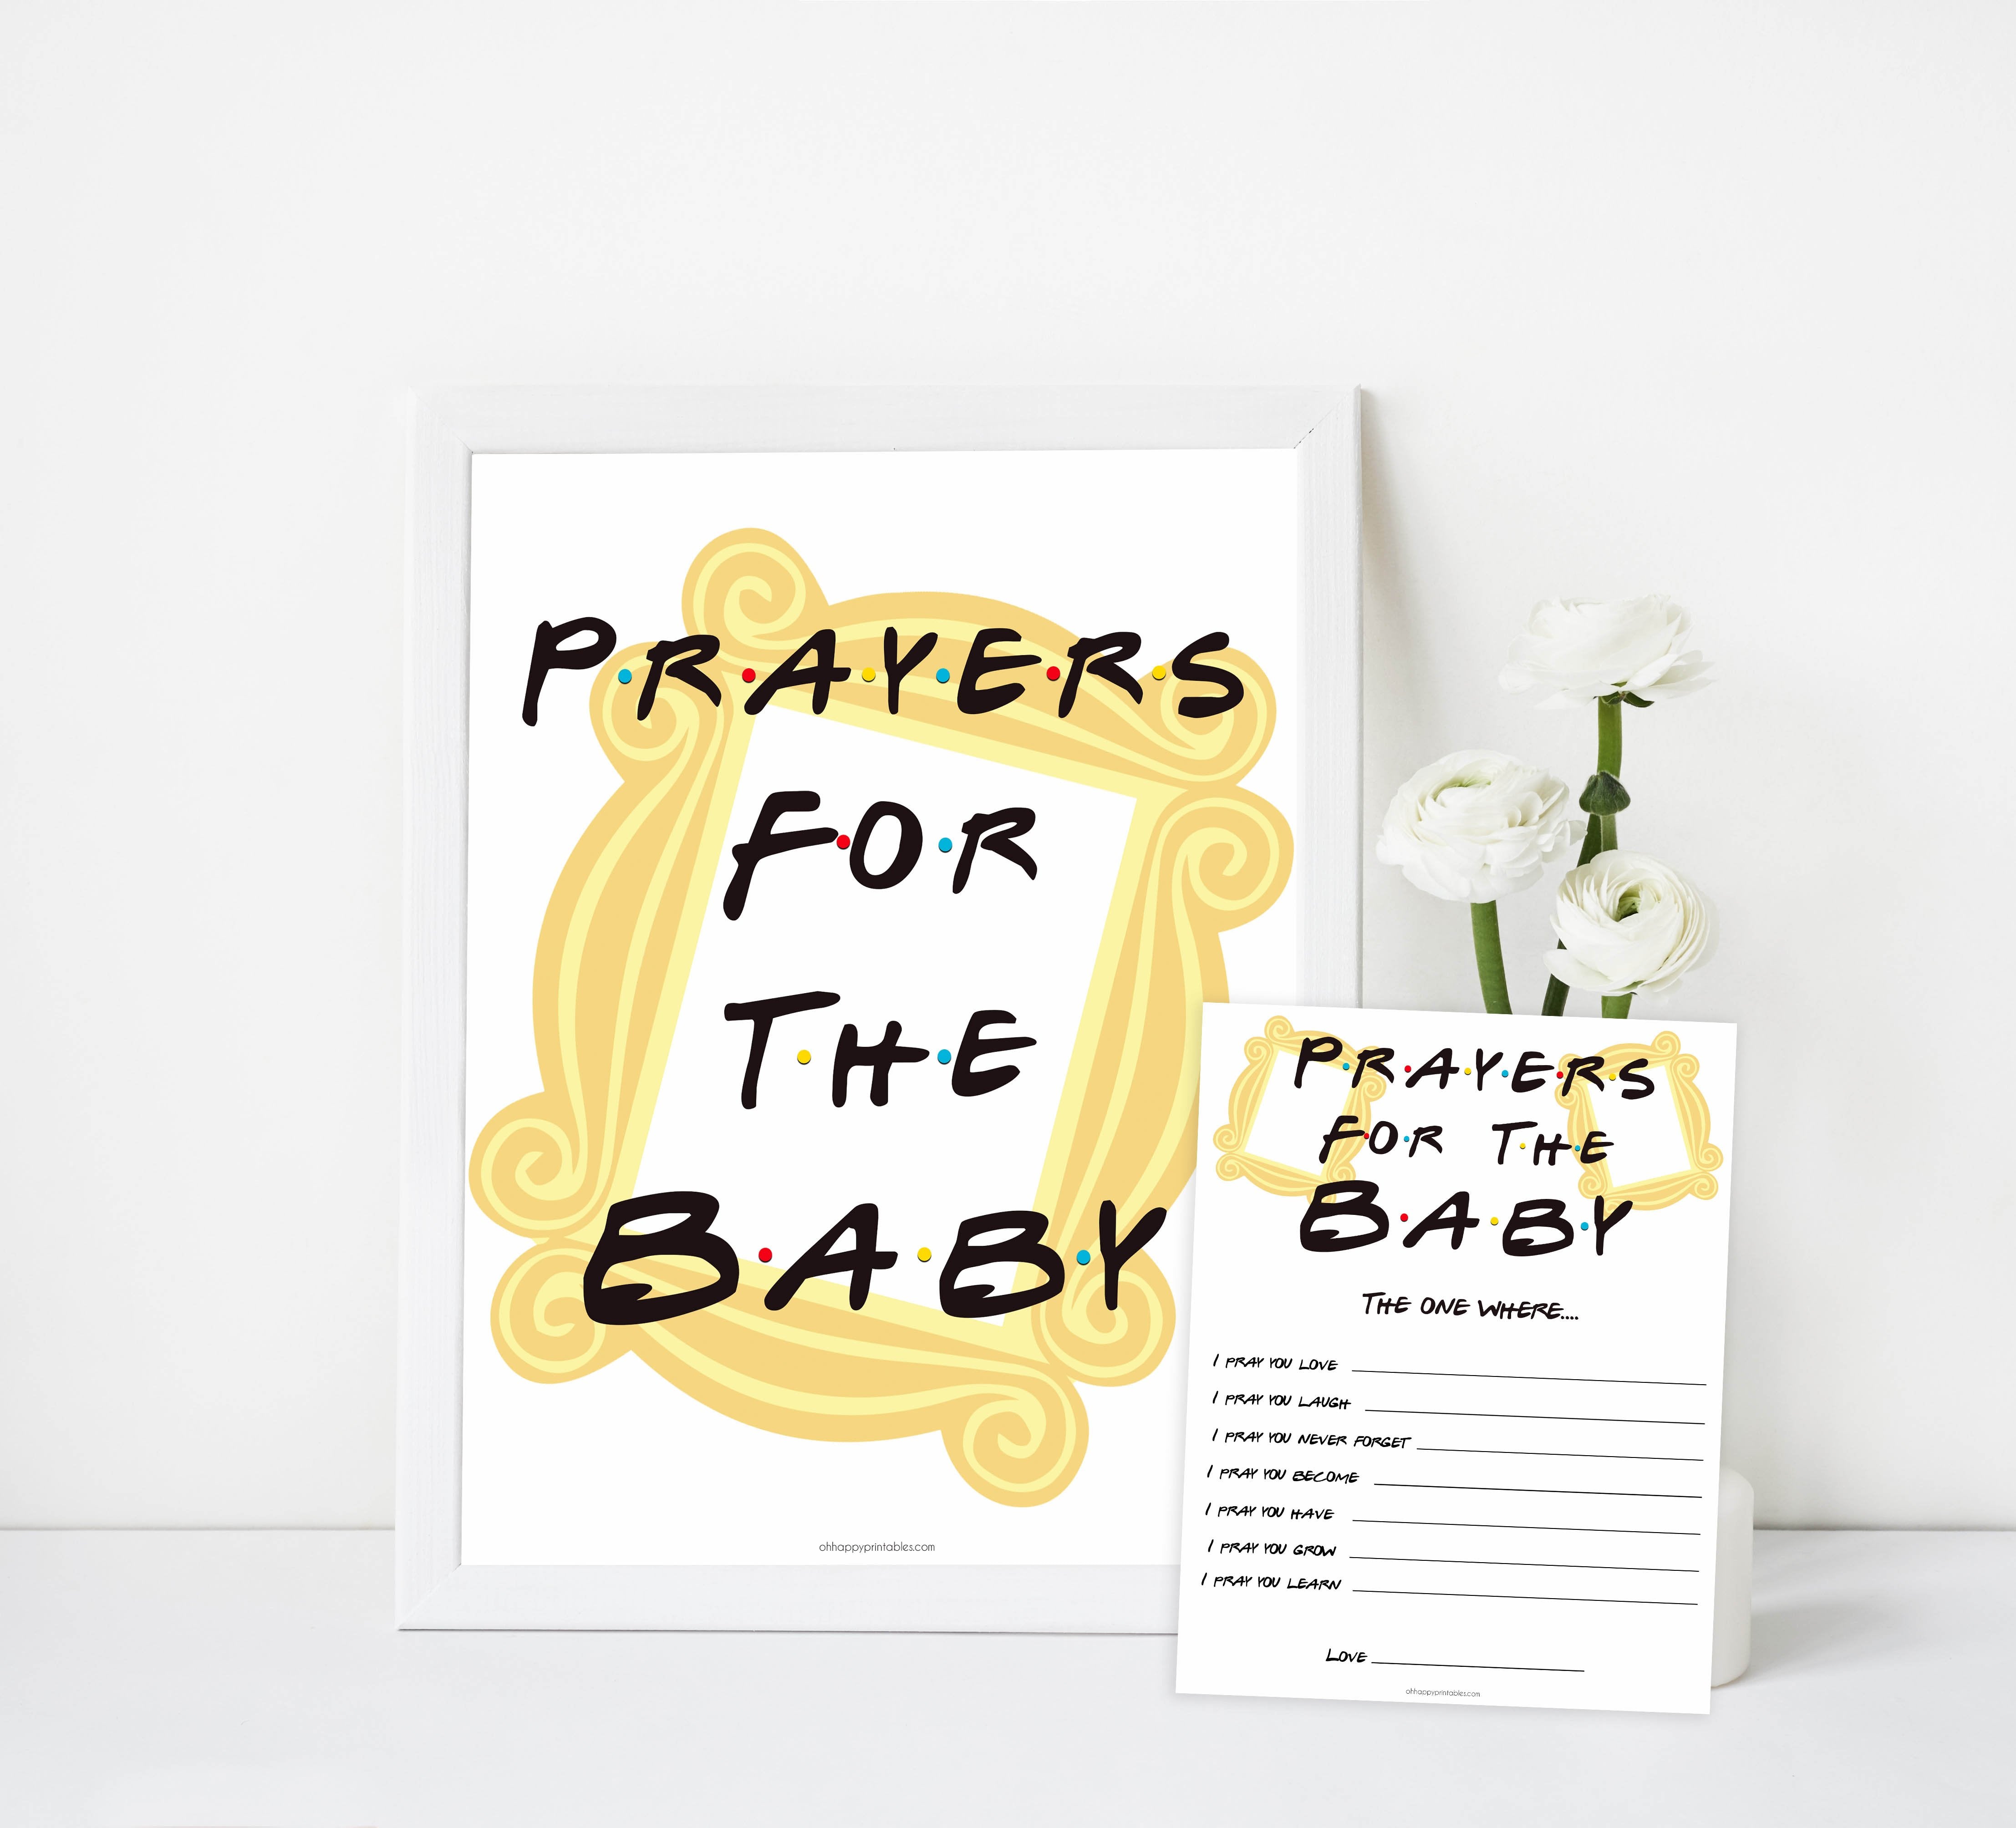 Prayers for the baby keepsake, Printable baby shower games, friends fun baby games, baby shower games, fun baby shower ideas, top baby shower ideas, friends baby shower, friends baby shower ideas